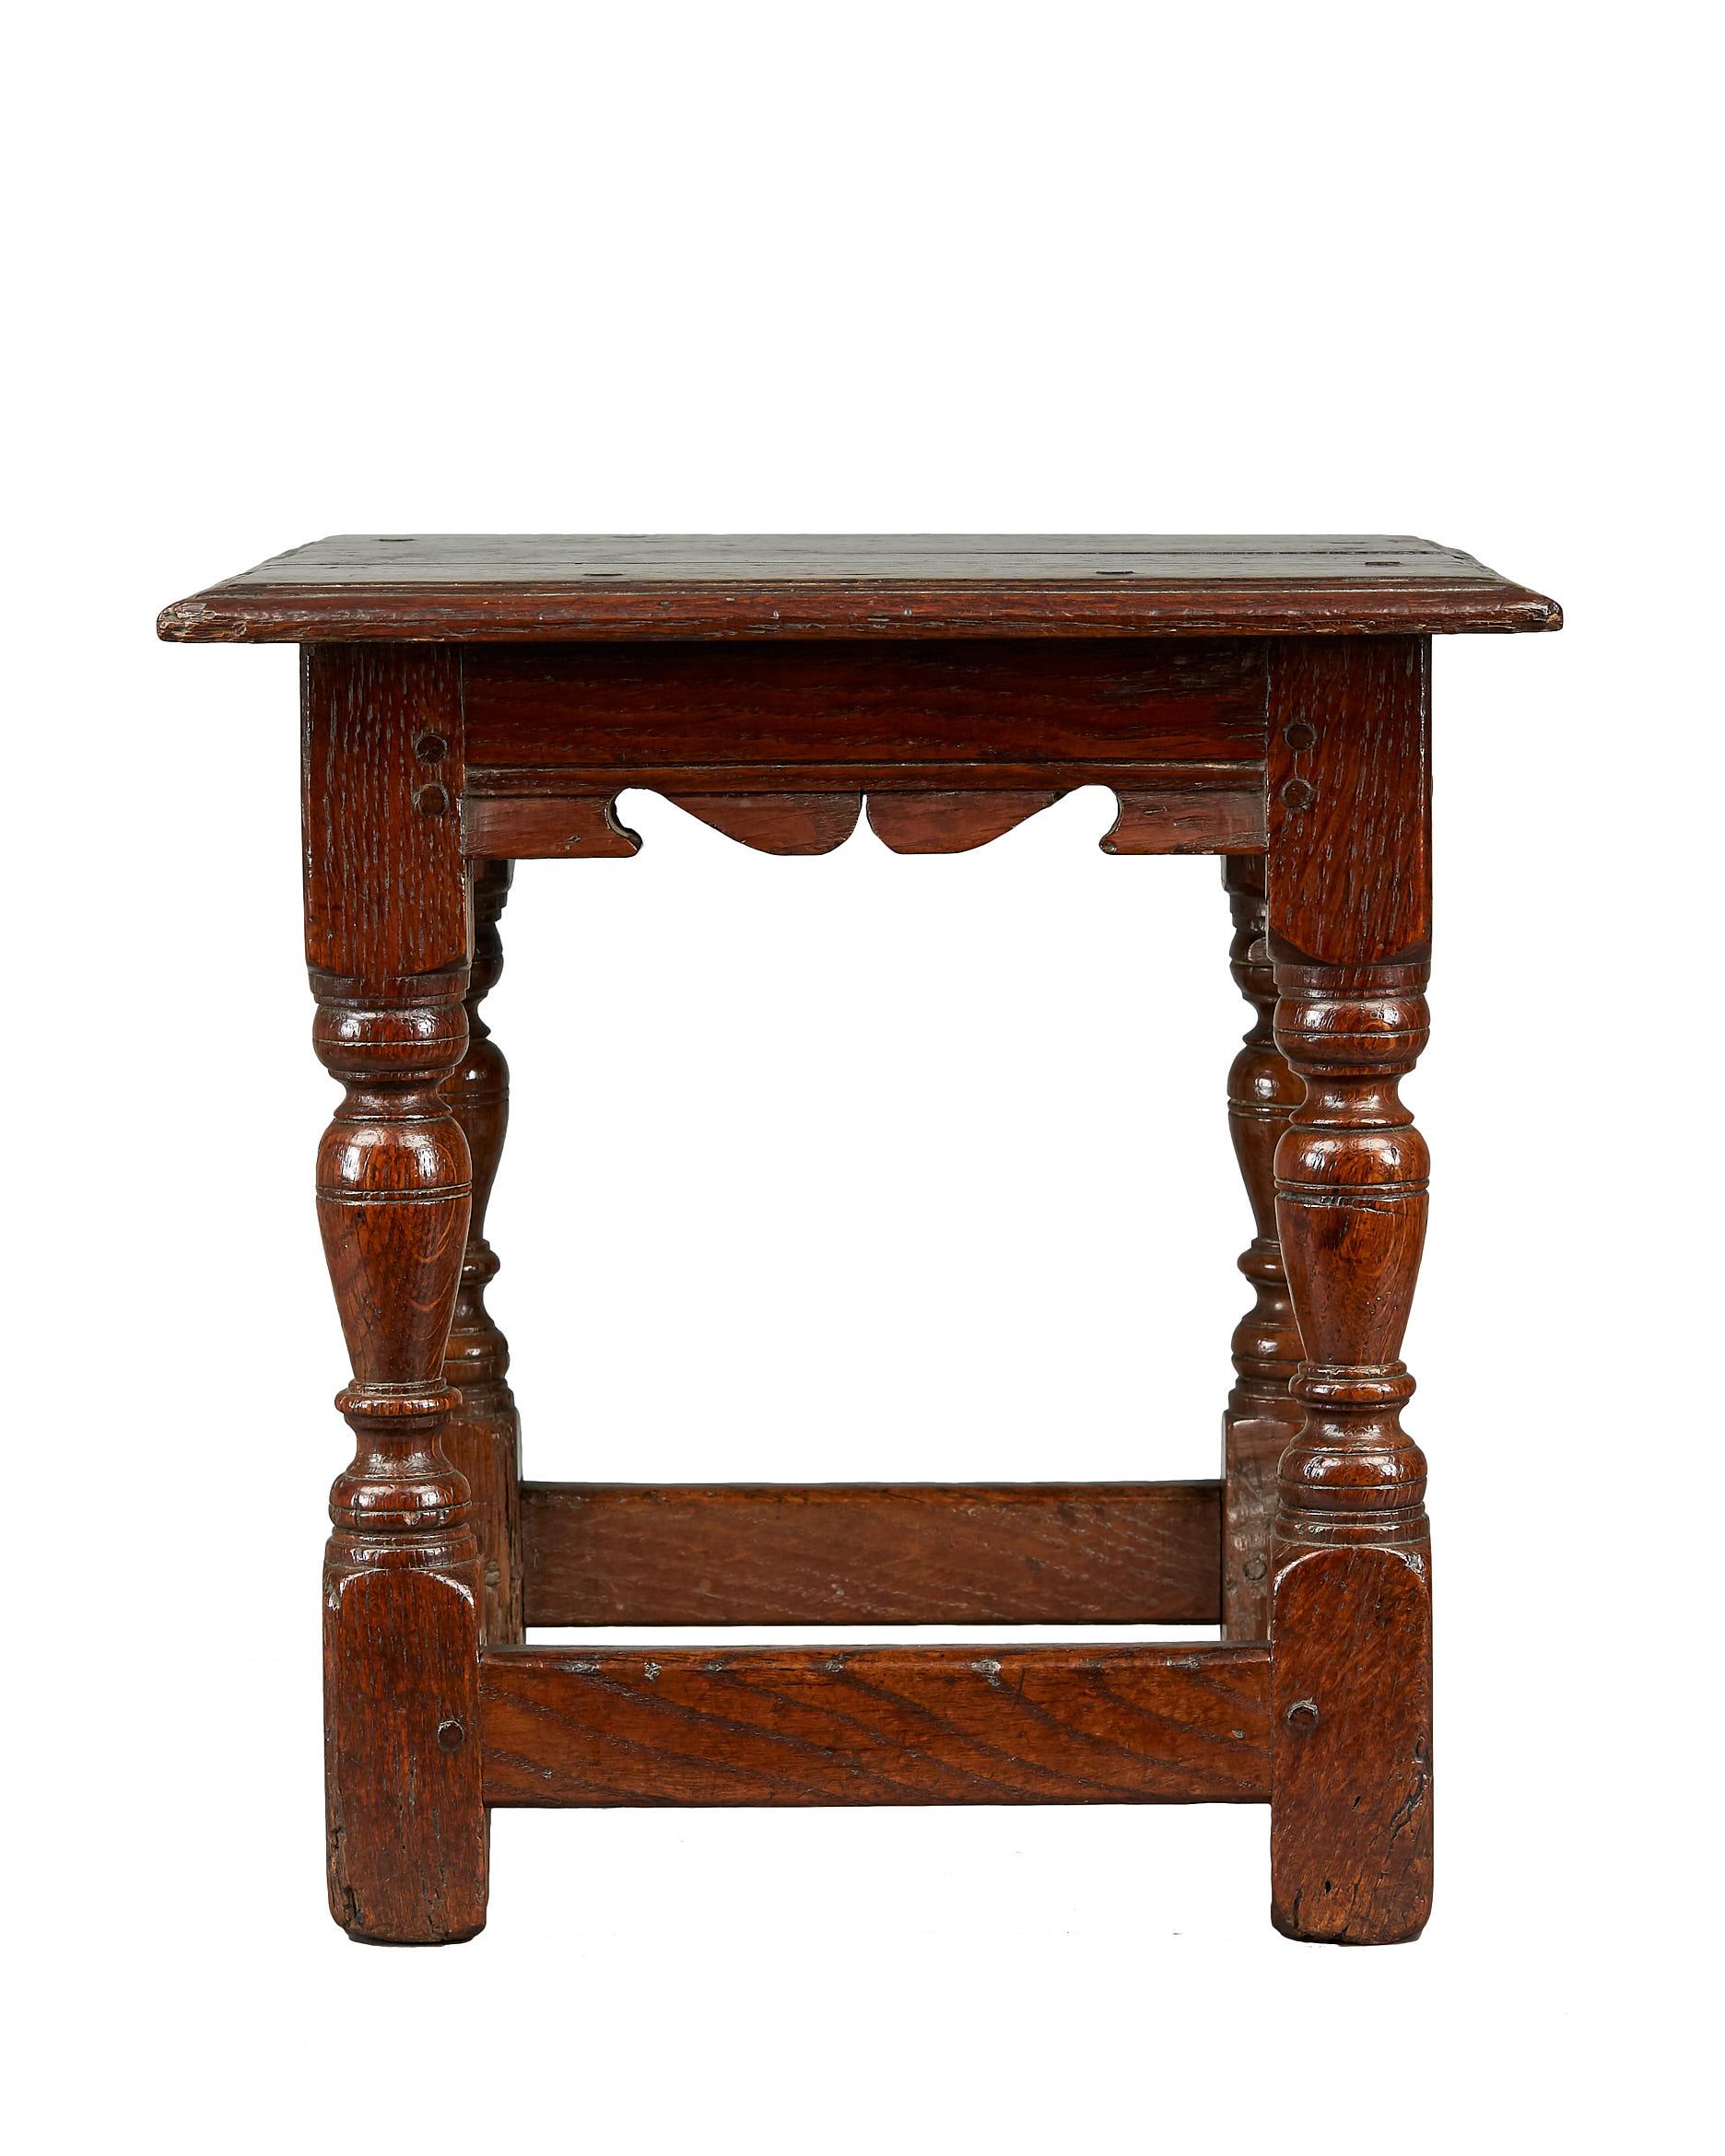 James I / Charles I oak low stool, English, circa 1620-1630.

The eight peg moulded plank top above channel moulded frieze rails with silhouette carved scrolls, joined by inverted baluster and collar turned legs with chamfered stretchers.